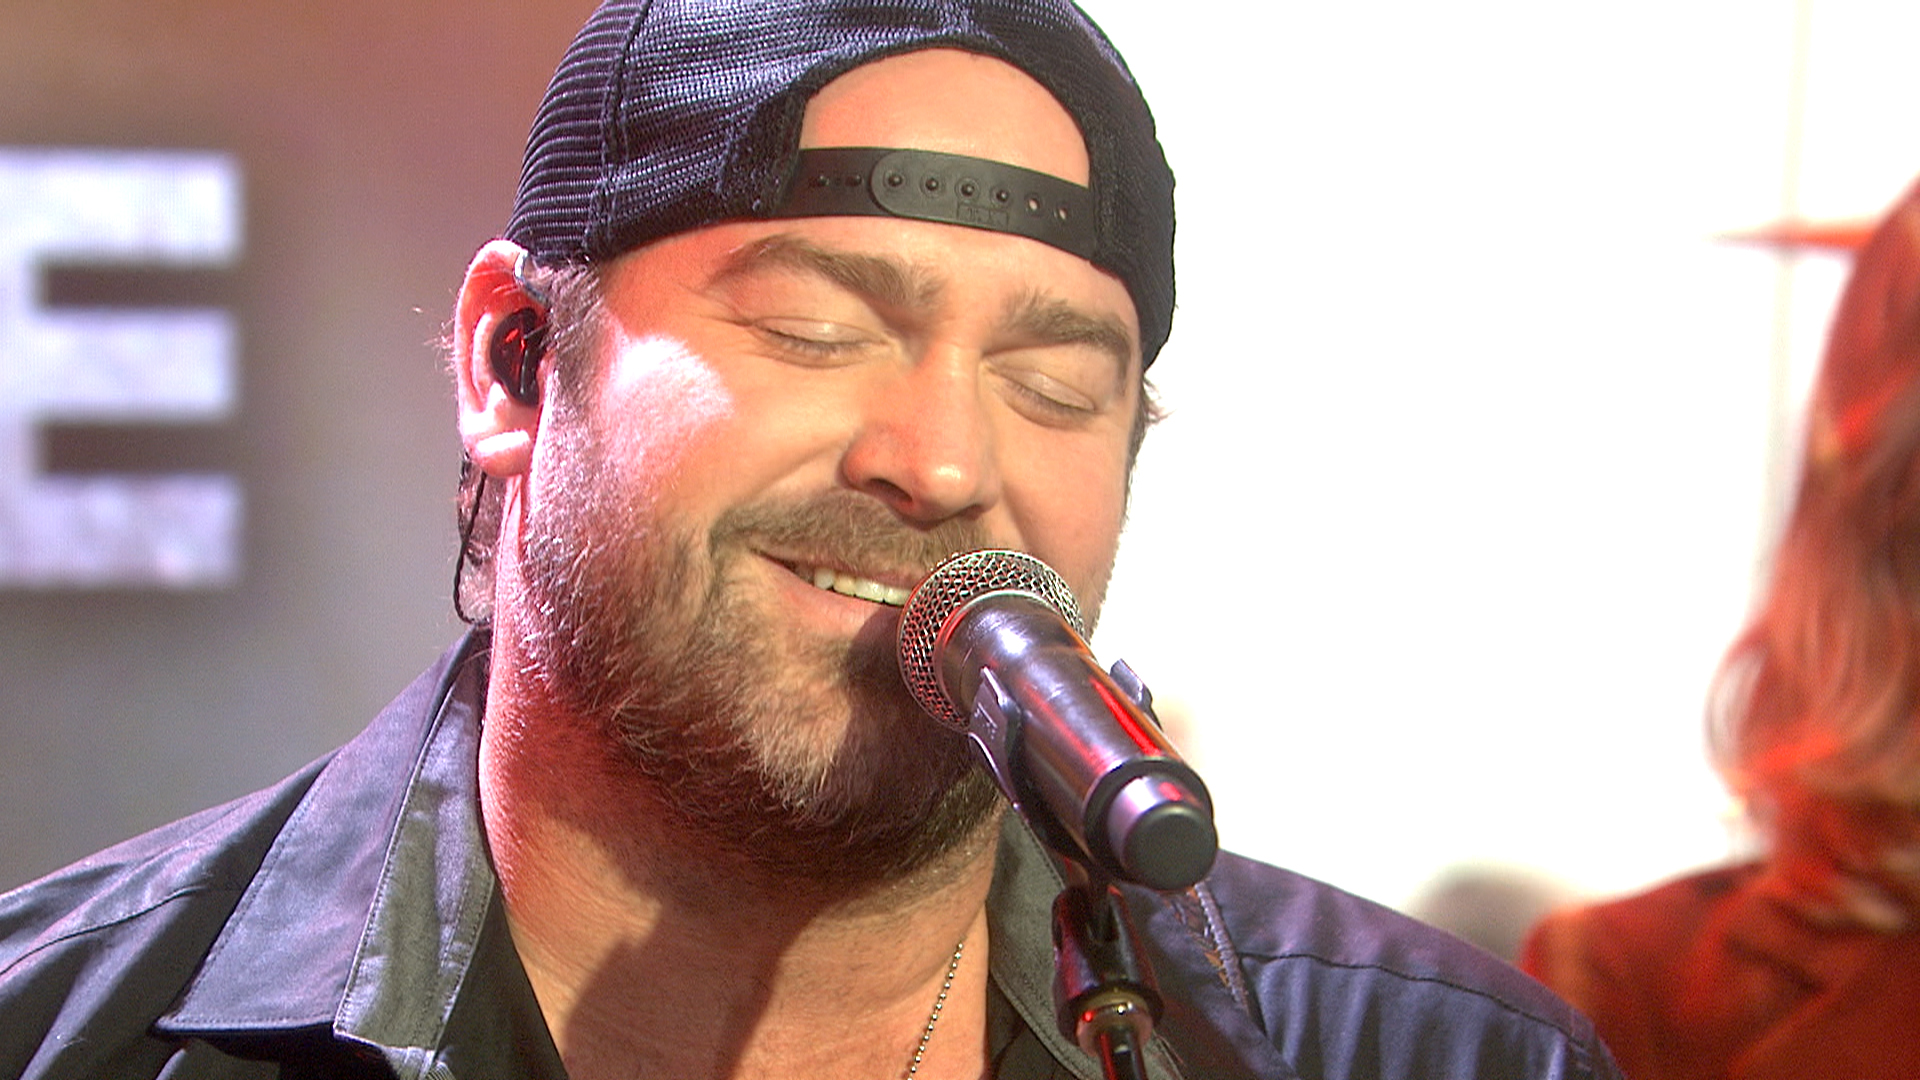 Lee Brice performs 'I Don't Dance' on TODAY